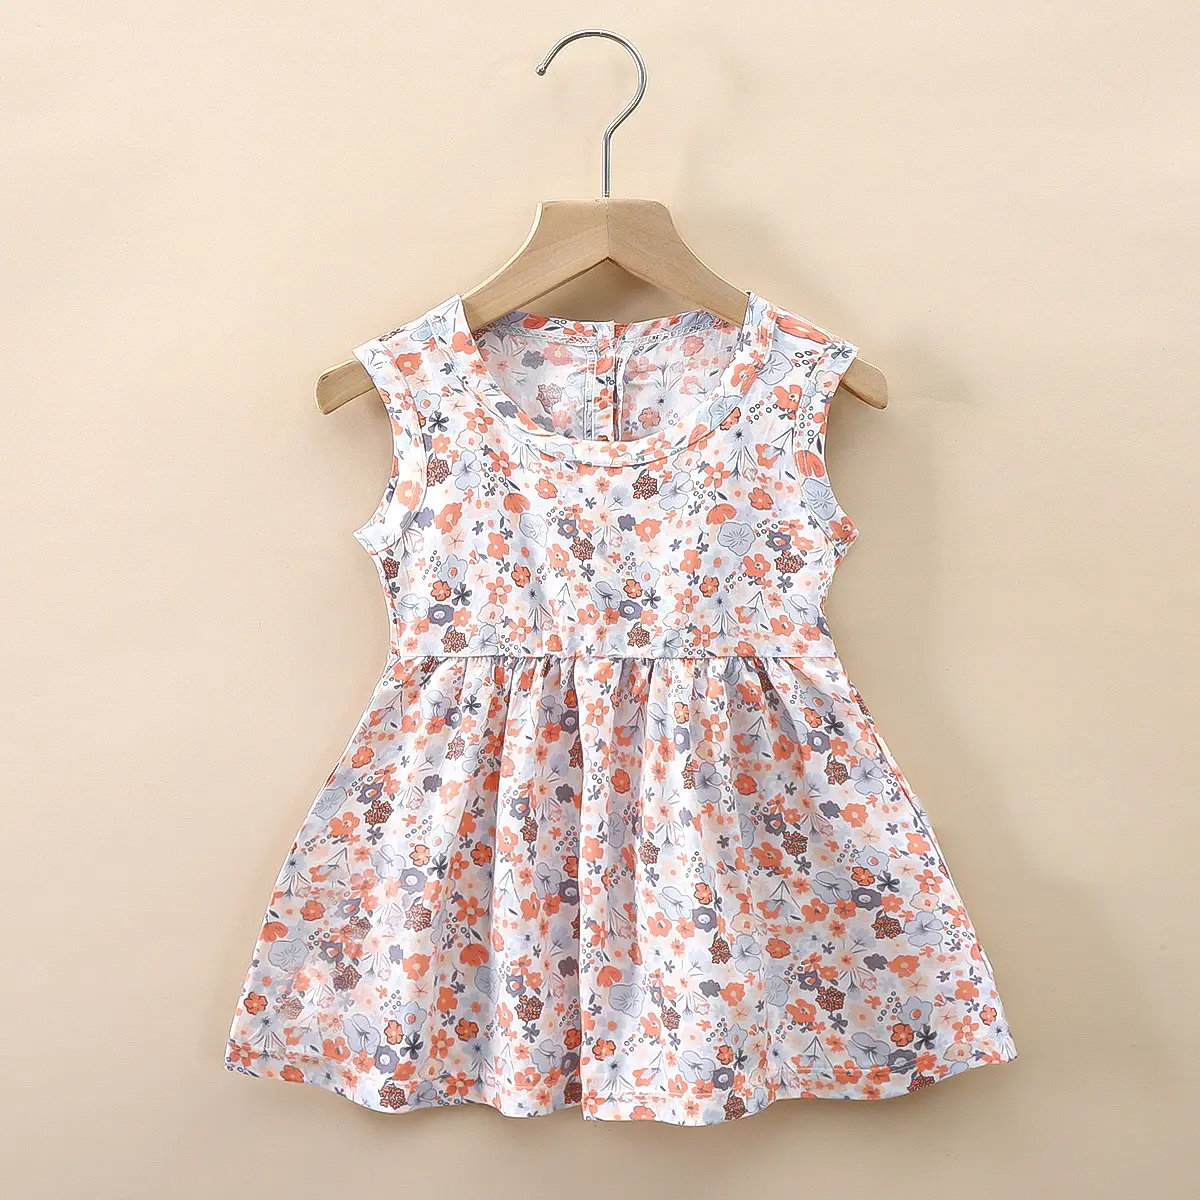 Wholesale Summer O-Neck Sleeveless Baby Girls Dress Soft Cute Floral Print Polyester Toddler Baby Dresses 0-3months for Daily